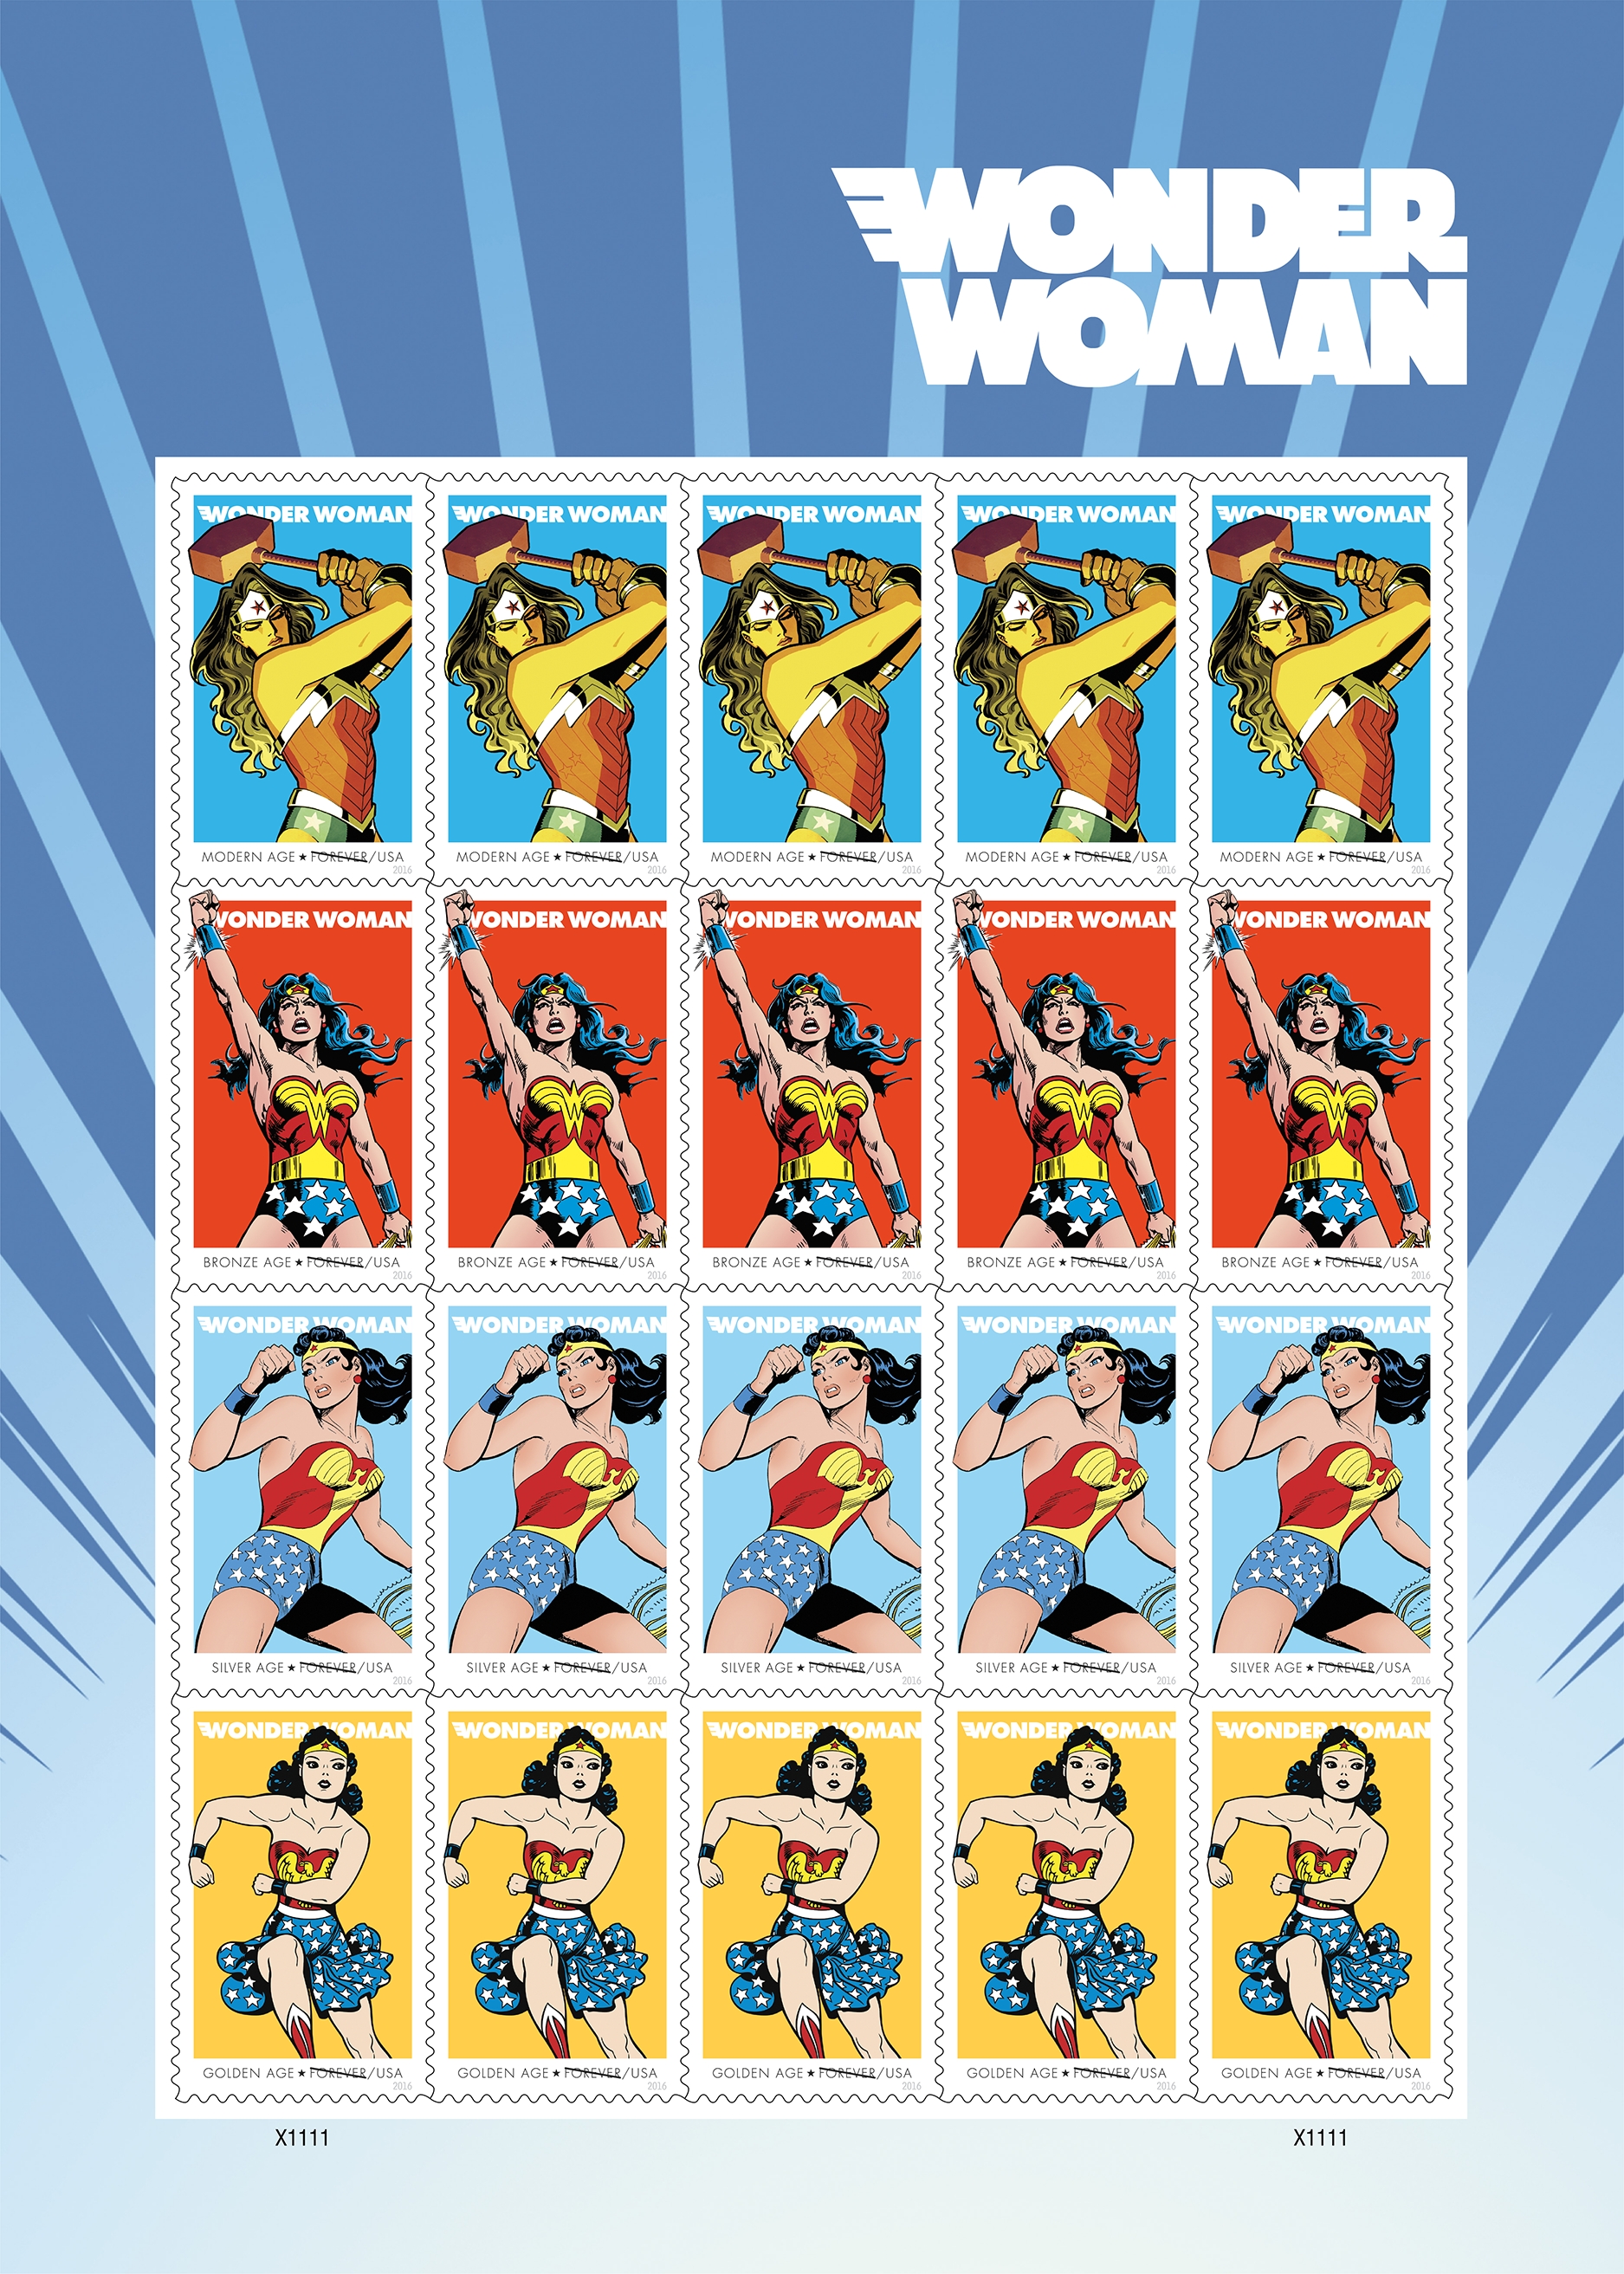 The U.S. Postal Service revealed its newest Wonder Woman stamps The U.S. Postal Service revealed its newest Wonder Woman stamps in honor of the superhero’s 75th anniversary on July 21, 2016 in honor of the superhero’s 75th anniversary.